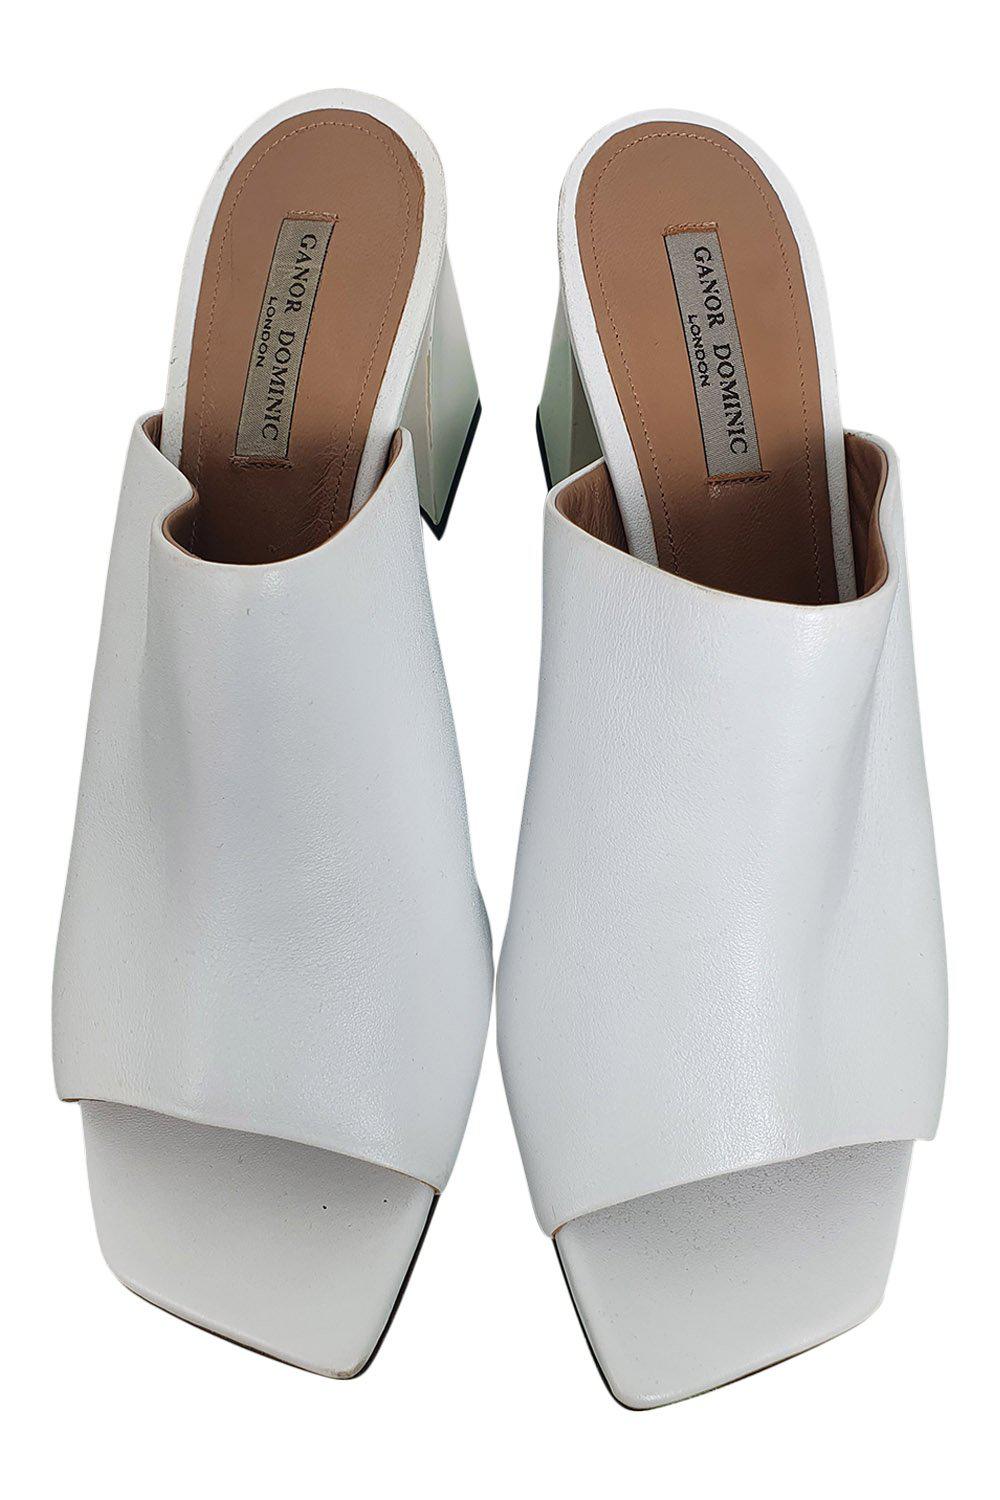 GANOR DOMINIC White Leather Open Front Bianca Art Shoes (UK 6 | EU 39 | US 9)-The Freperie